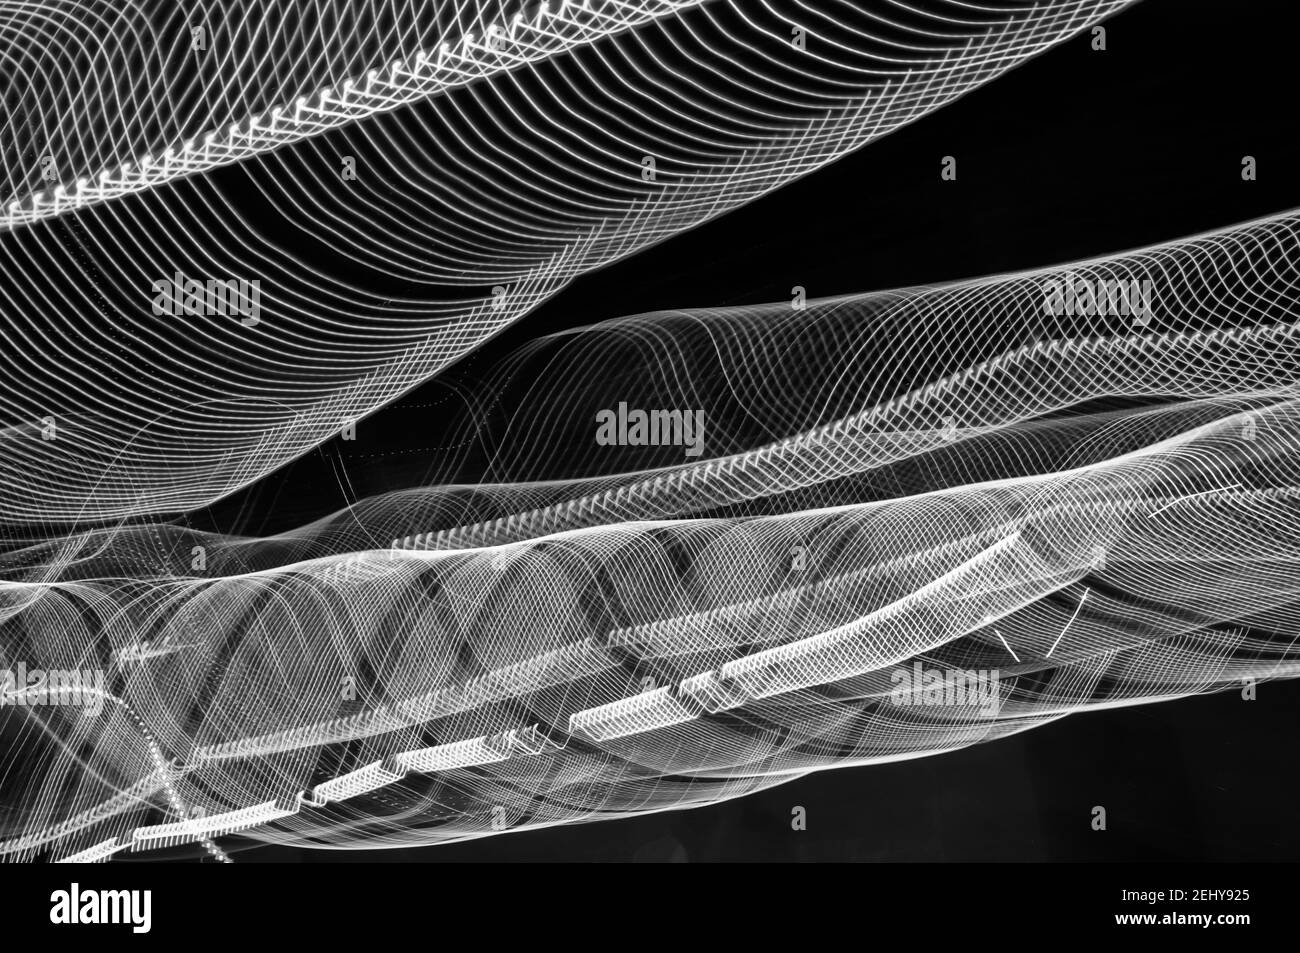 light painting in black and white, abstract background Stock Photo